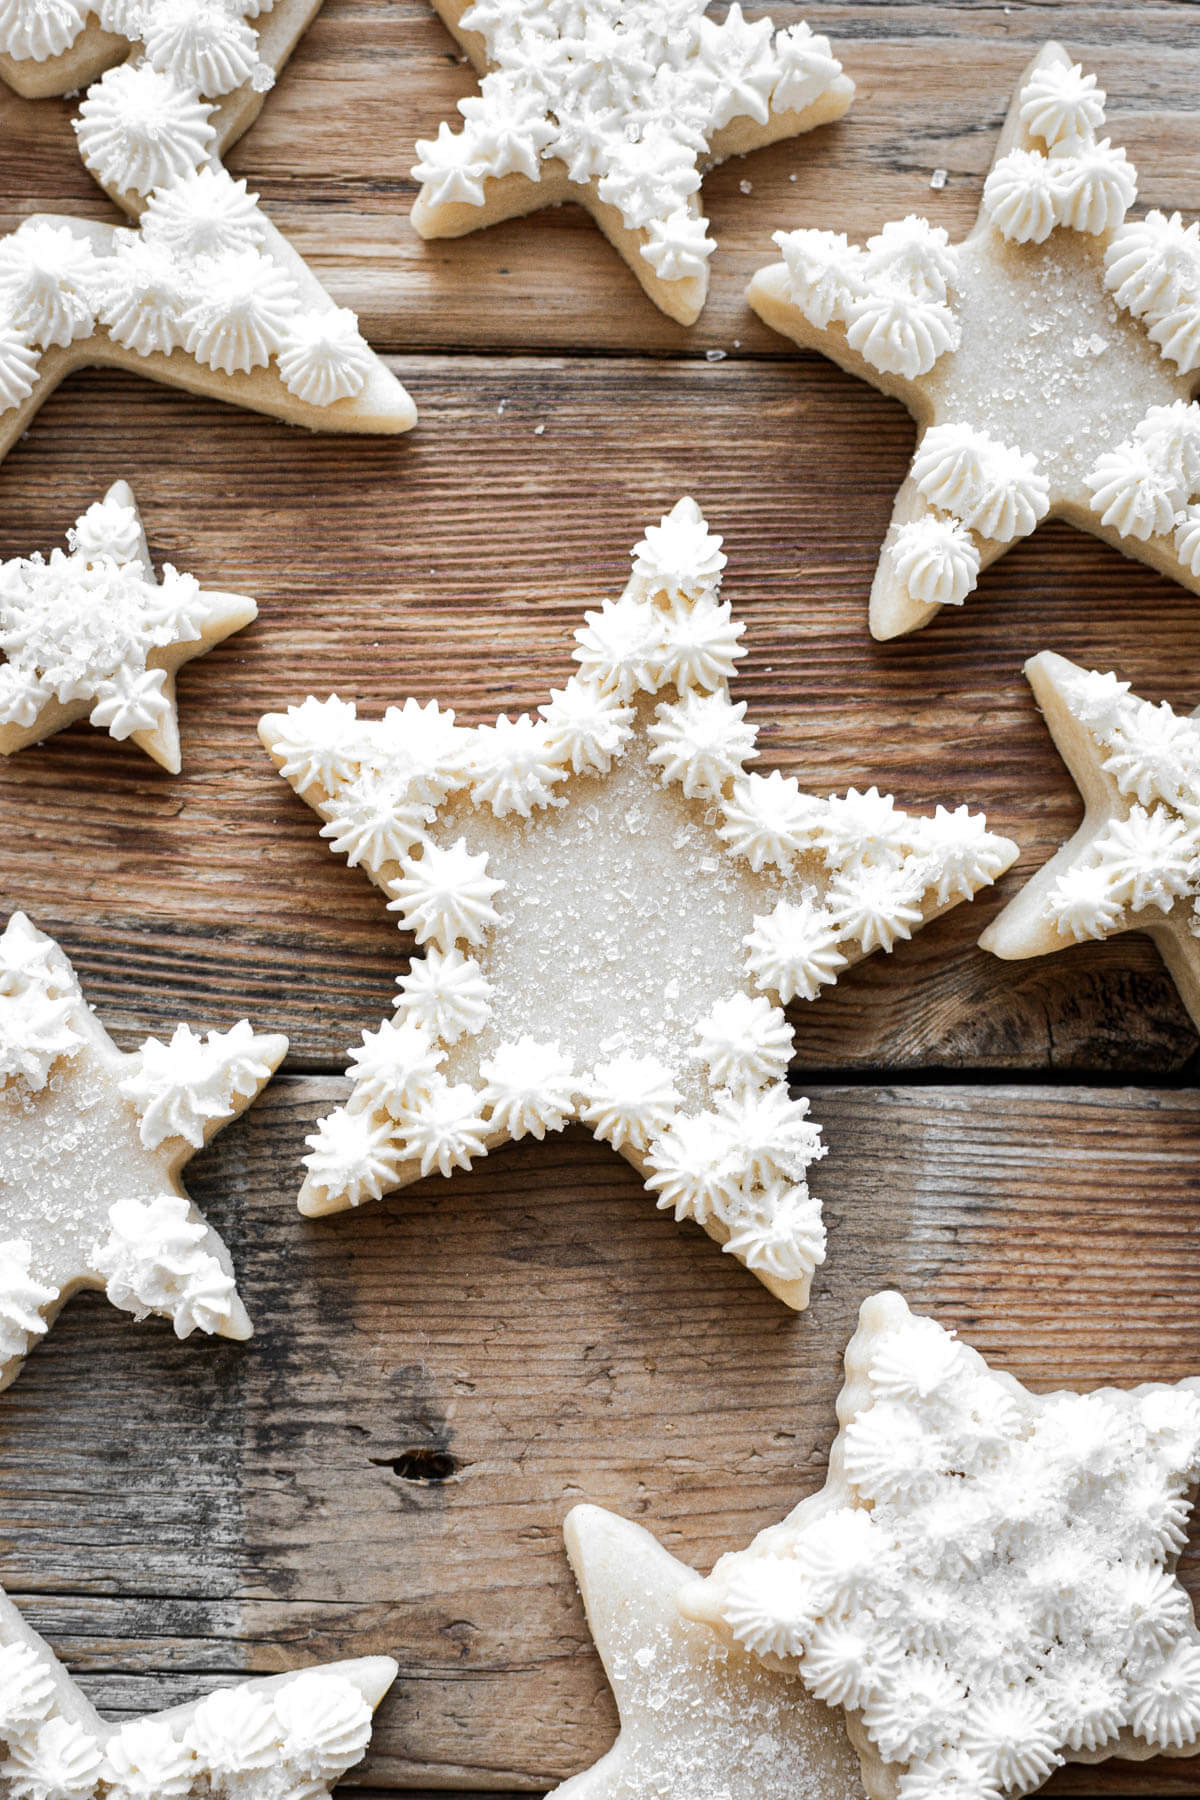 Star shaped cutout Christmas cookies decorated with white peppermint buttercream.